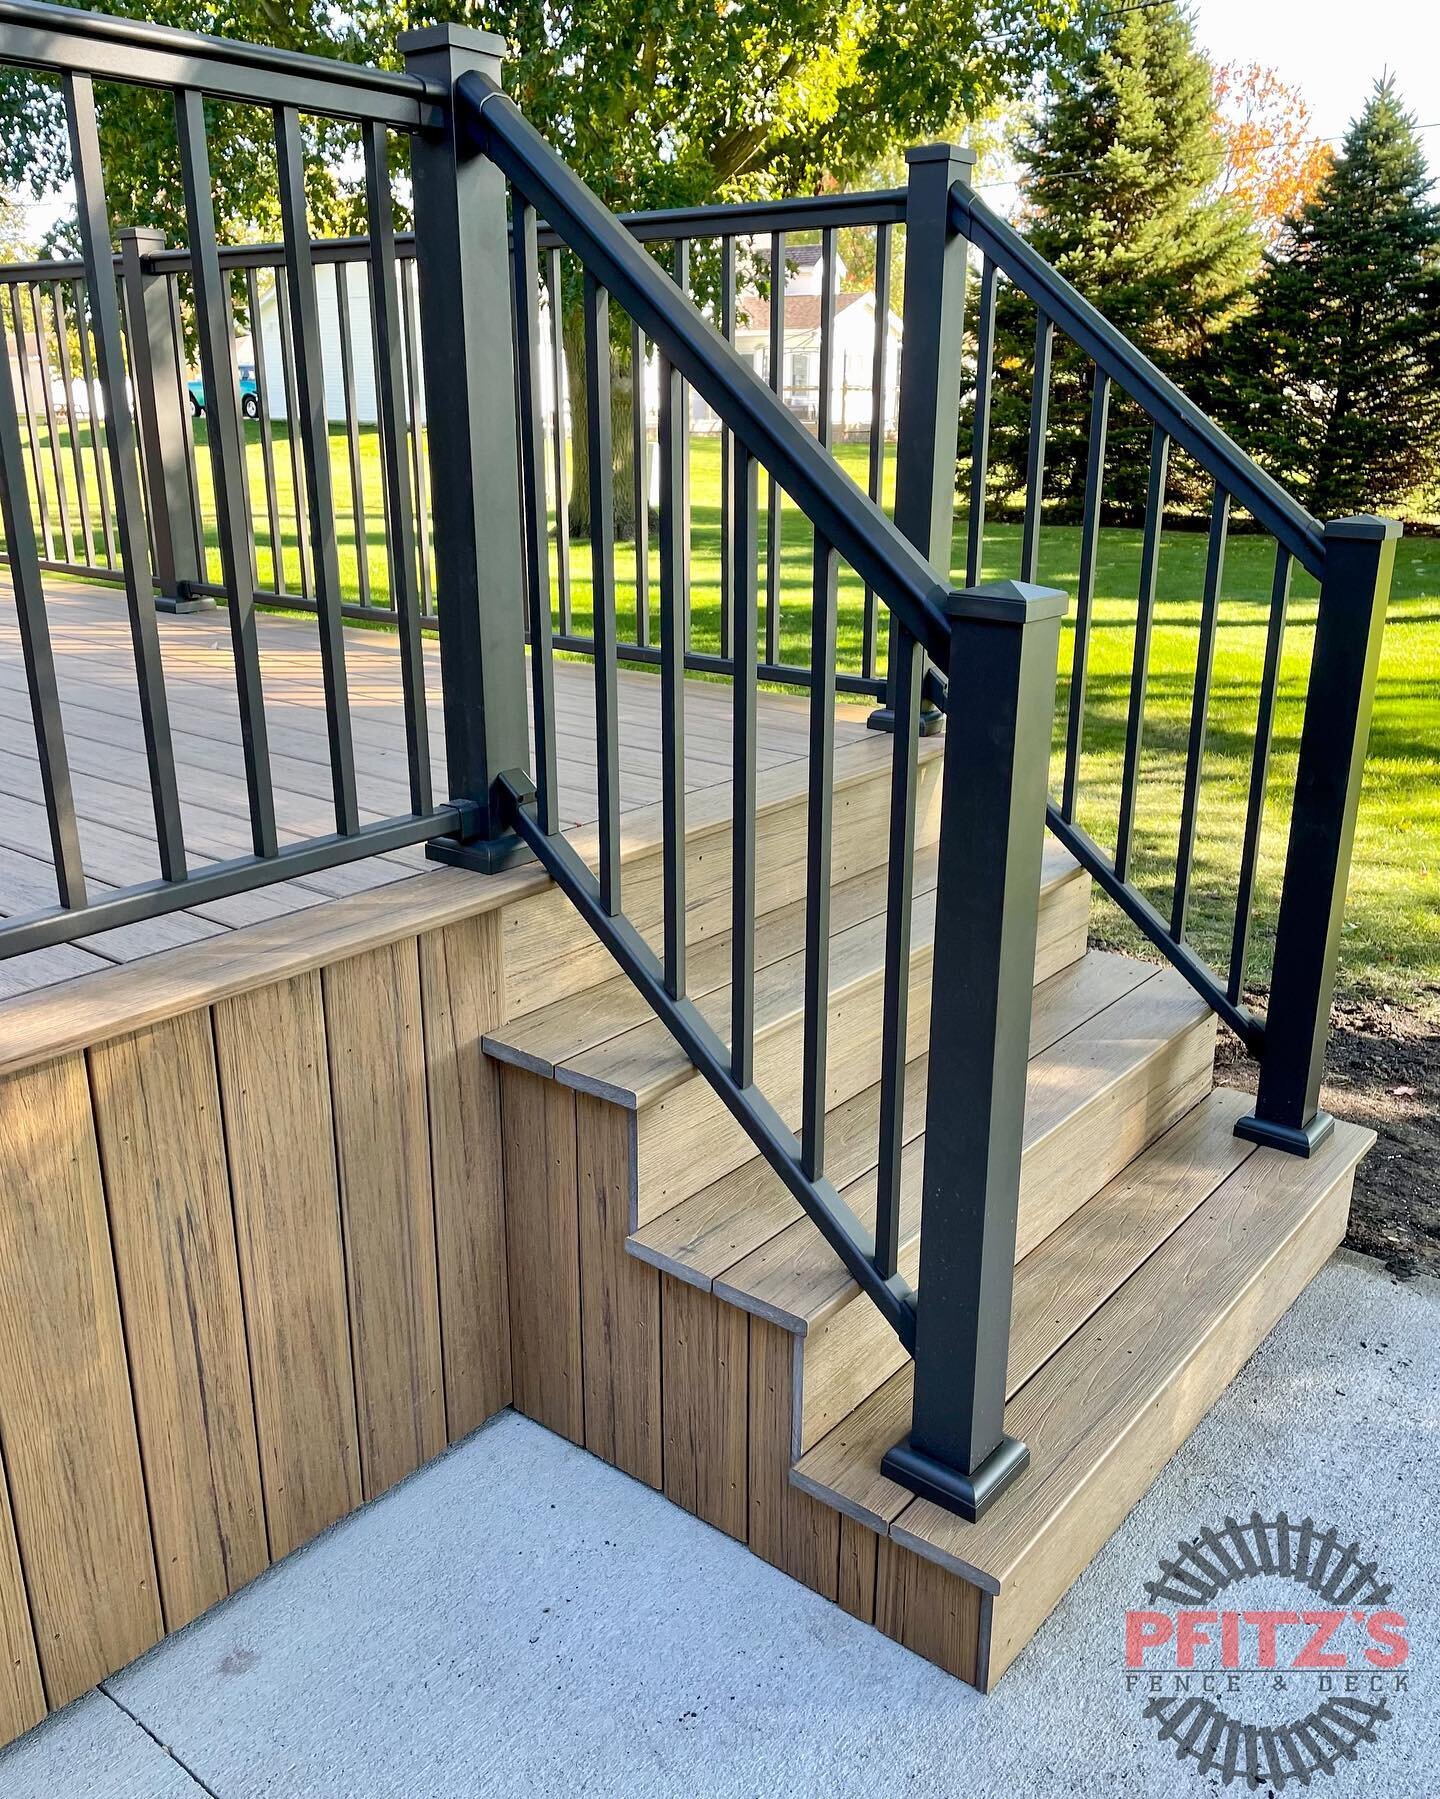 Our customer told us his new deck was the talk of the neighborhood! Now THAT is what we like to hear! 🗣️

We replaced his old, sagging wood deck with maintenance-free composite and added aluminum handrail to his new front stoop!

✔️TimberTech PRO Re